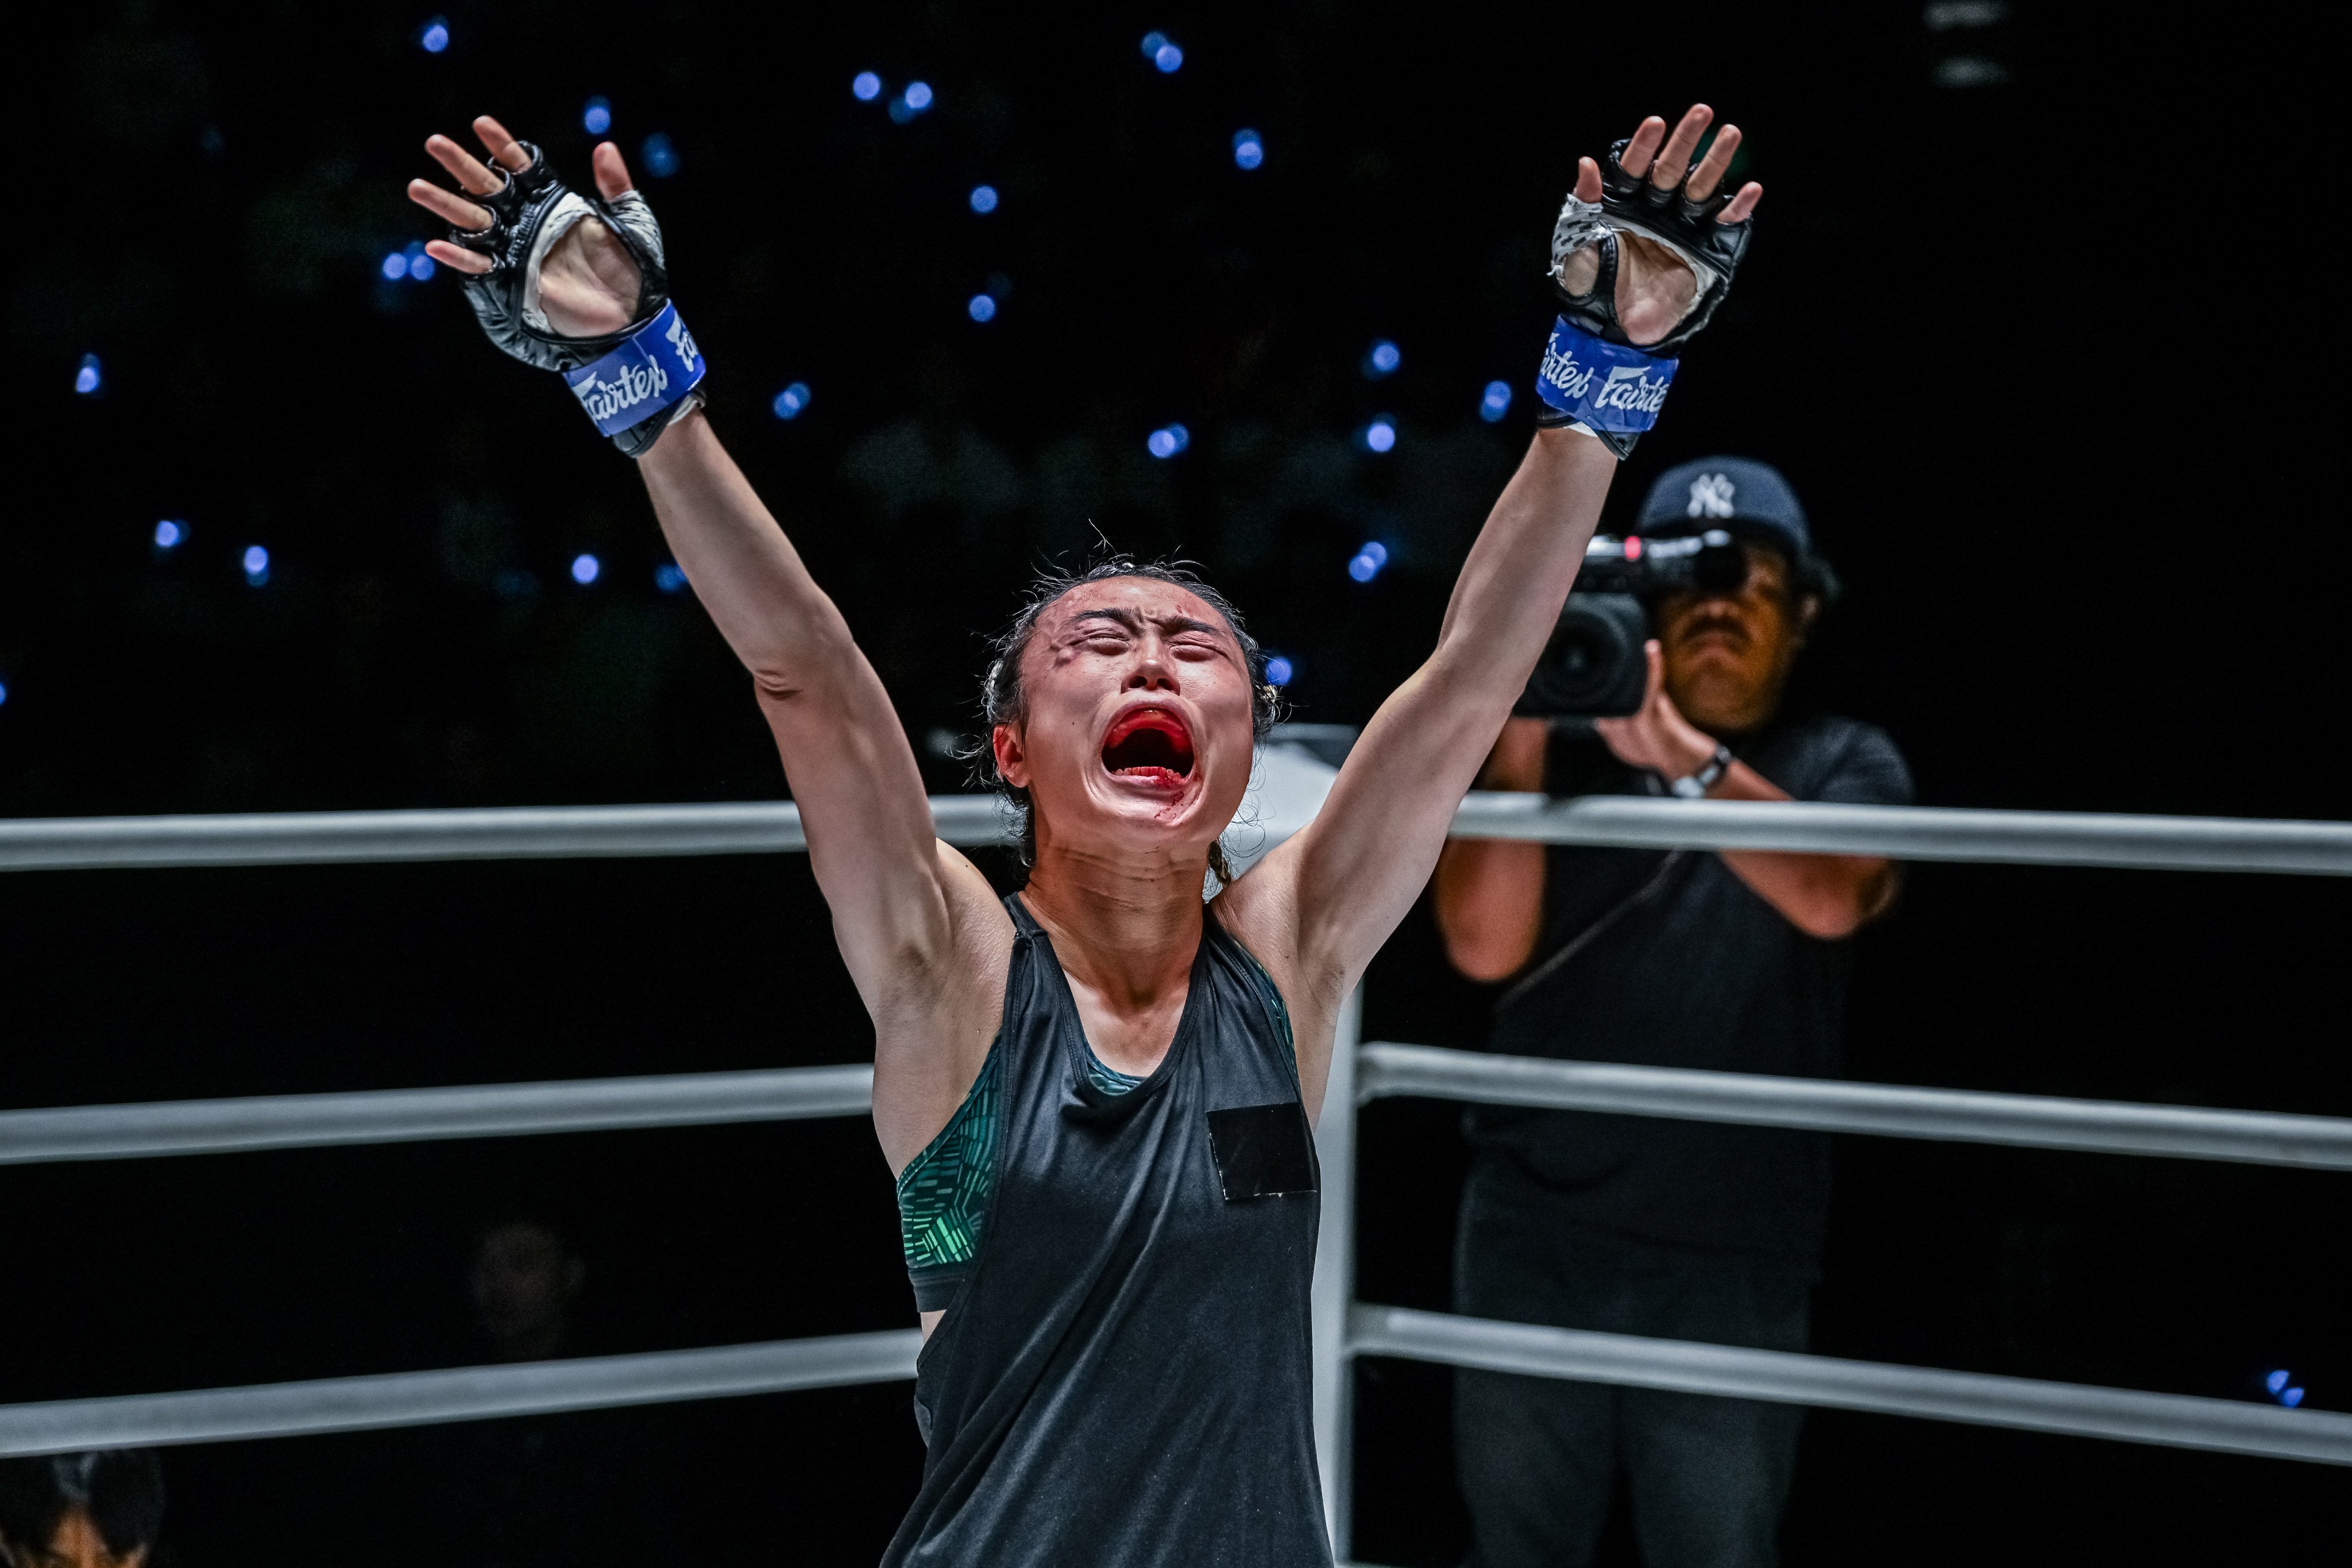 Yu Yau Pui will fac Amy Pirnie in an atomweight Muay Thai bout at ONE Fight Night 24. Photo: ONE Championship